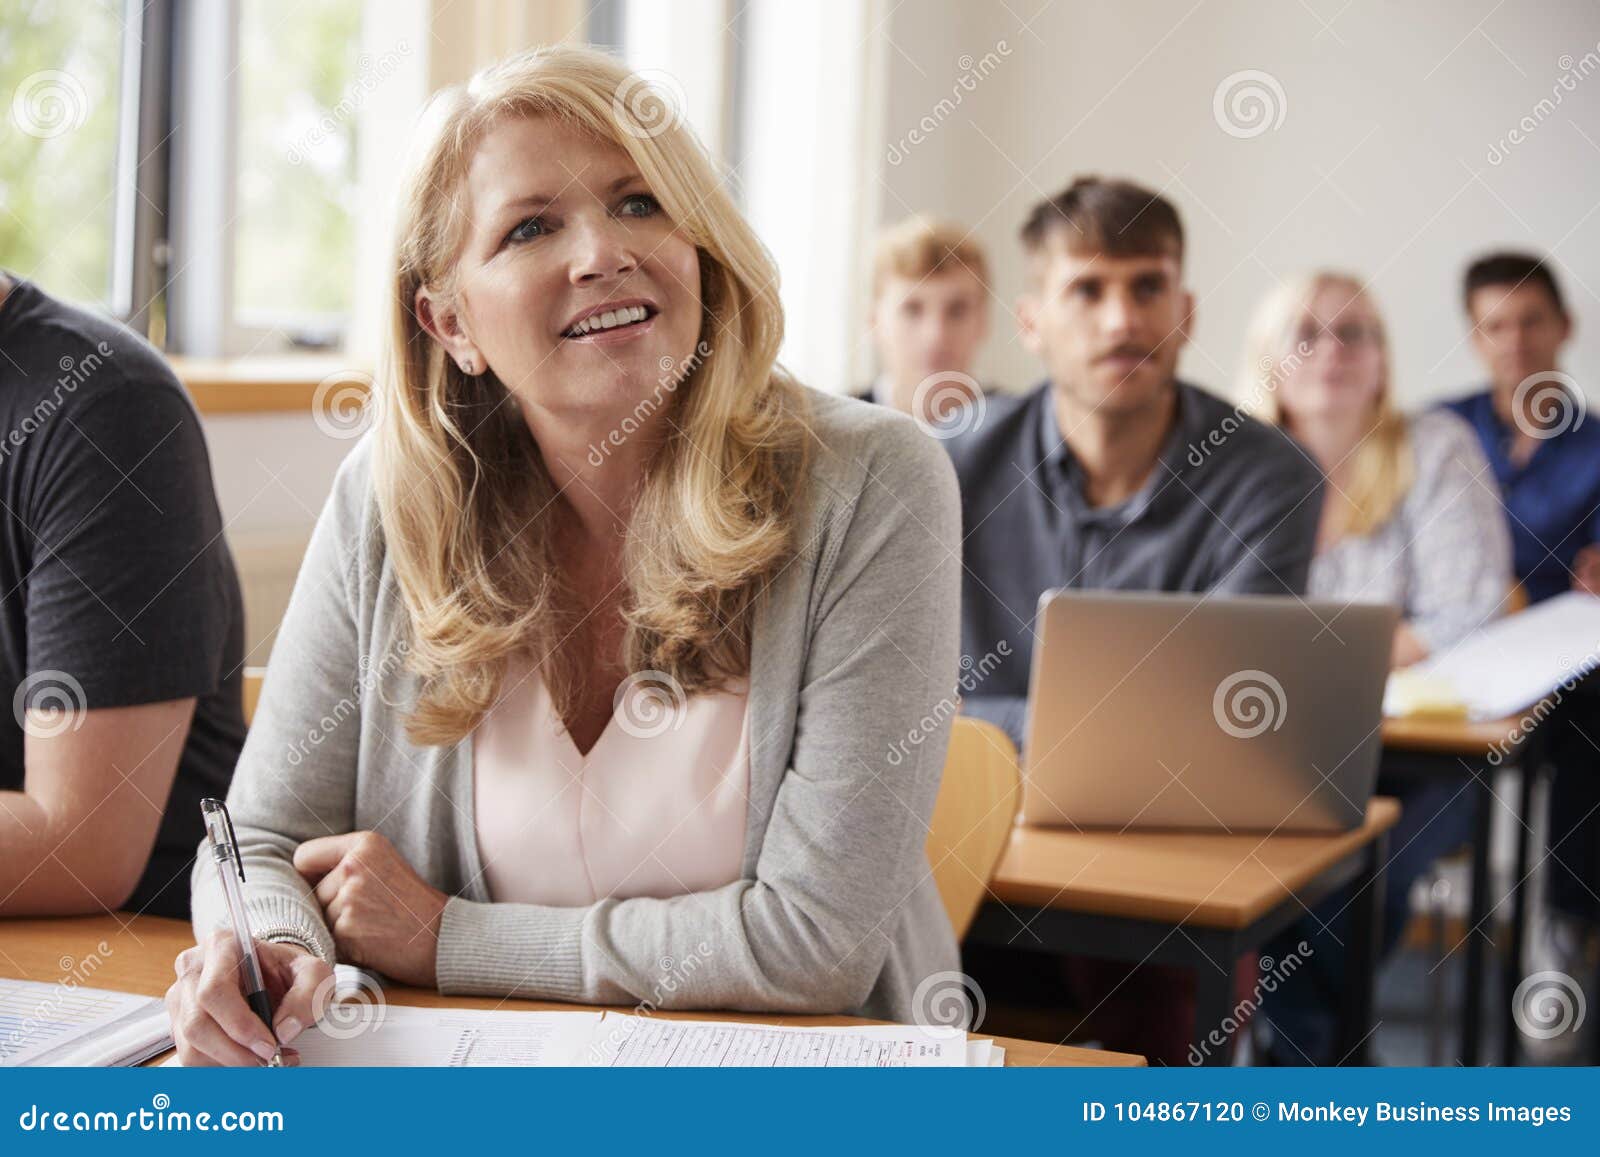 mature woman in college attending adult education class